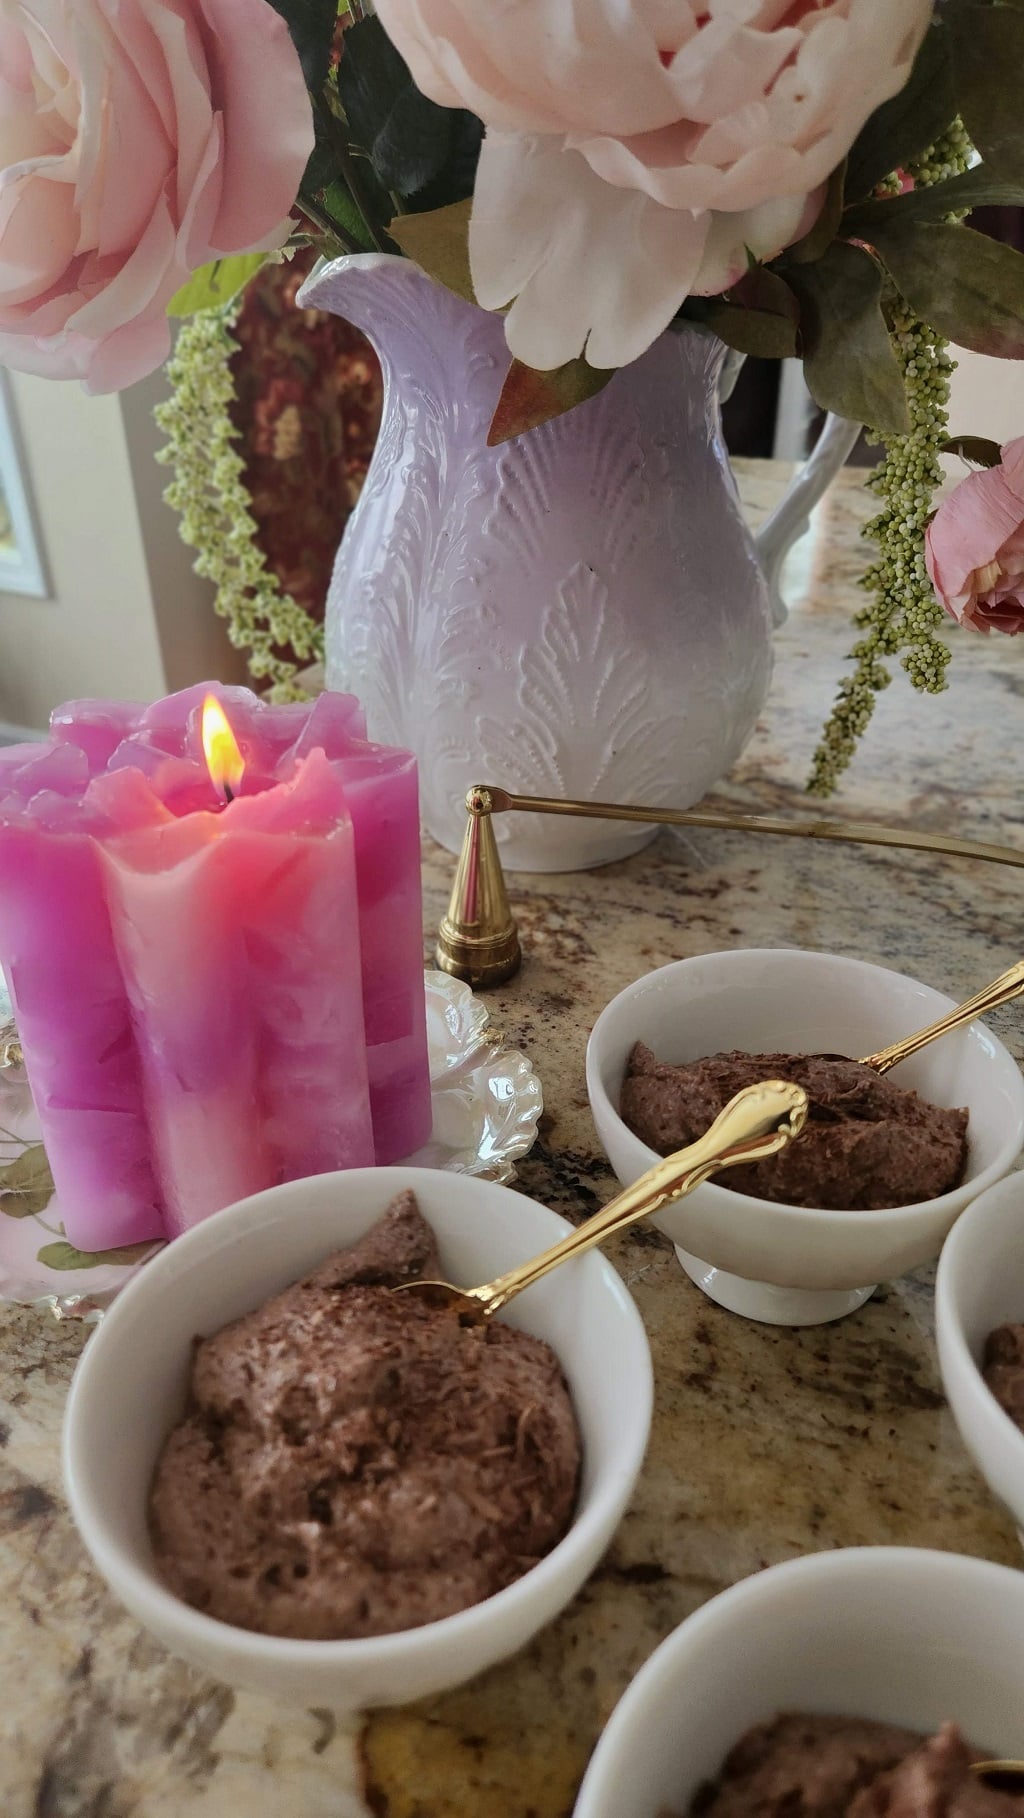 Chocolate Ricotta Mousse Made with 3 Ingredients